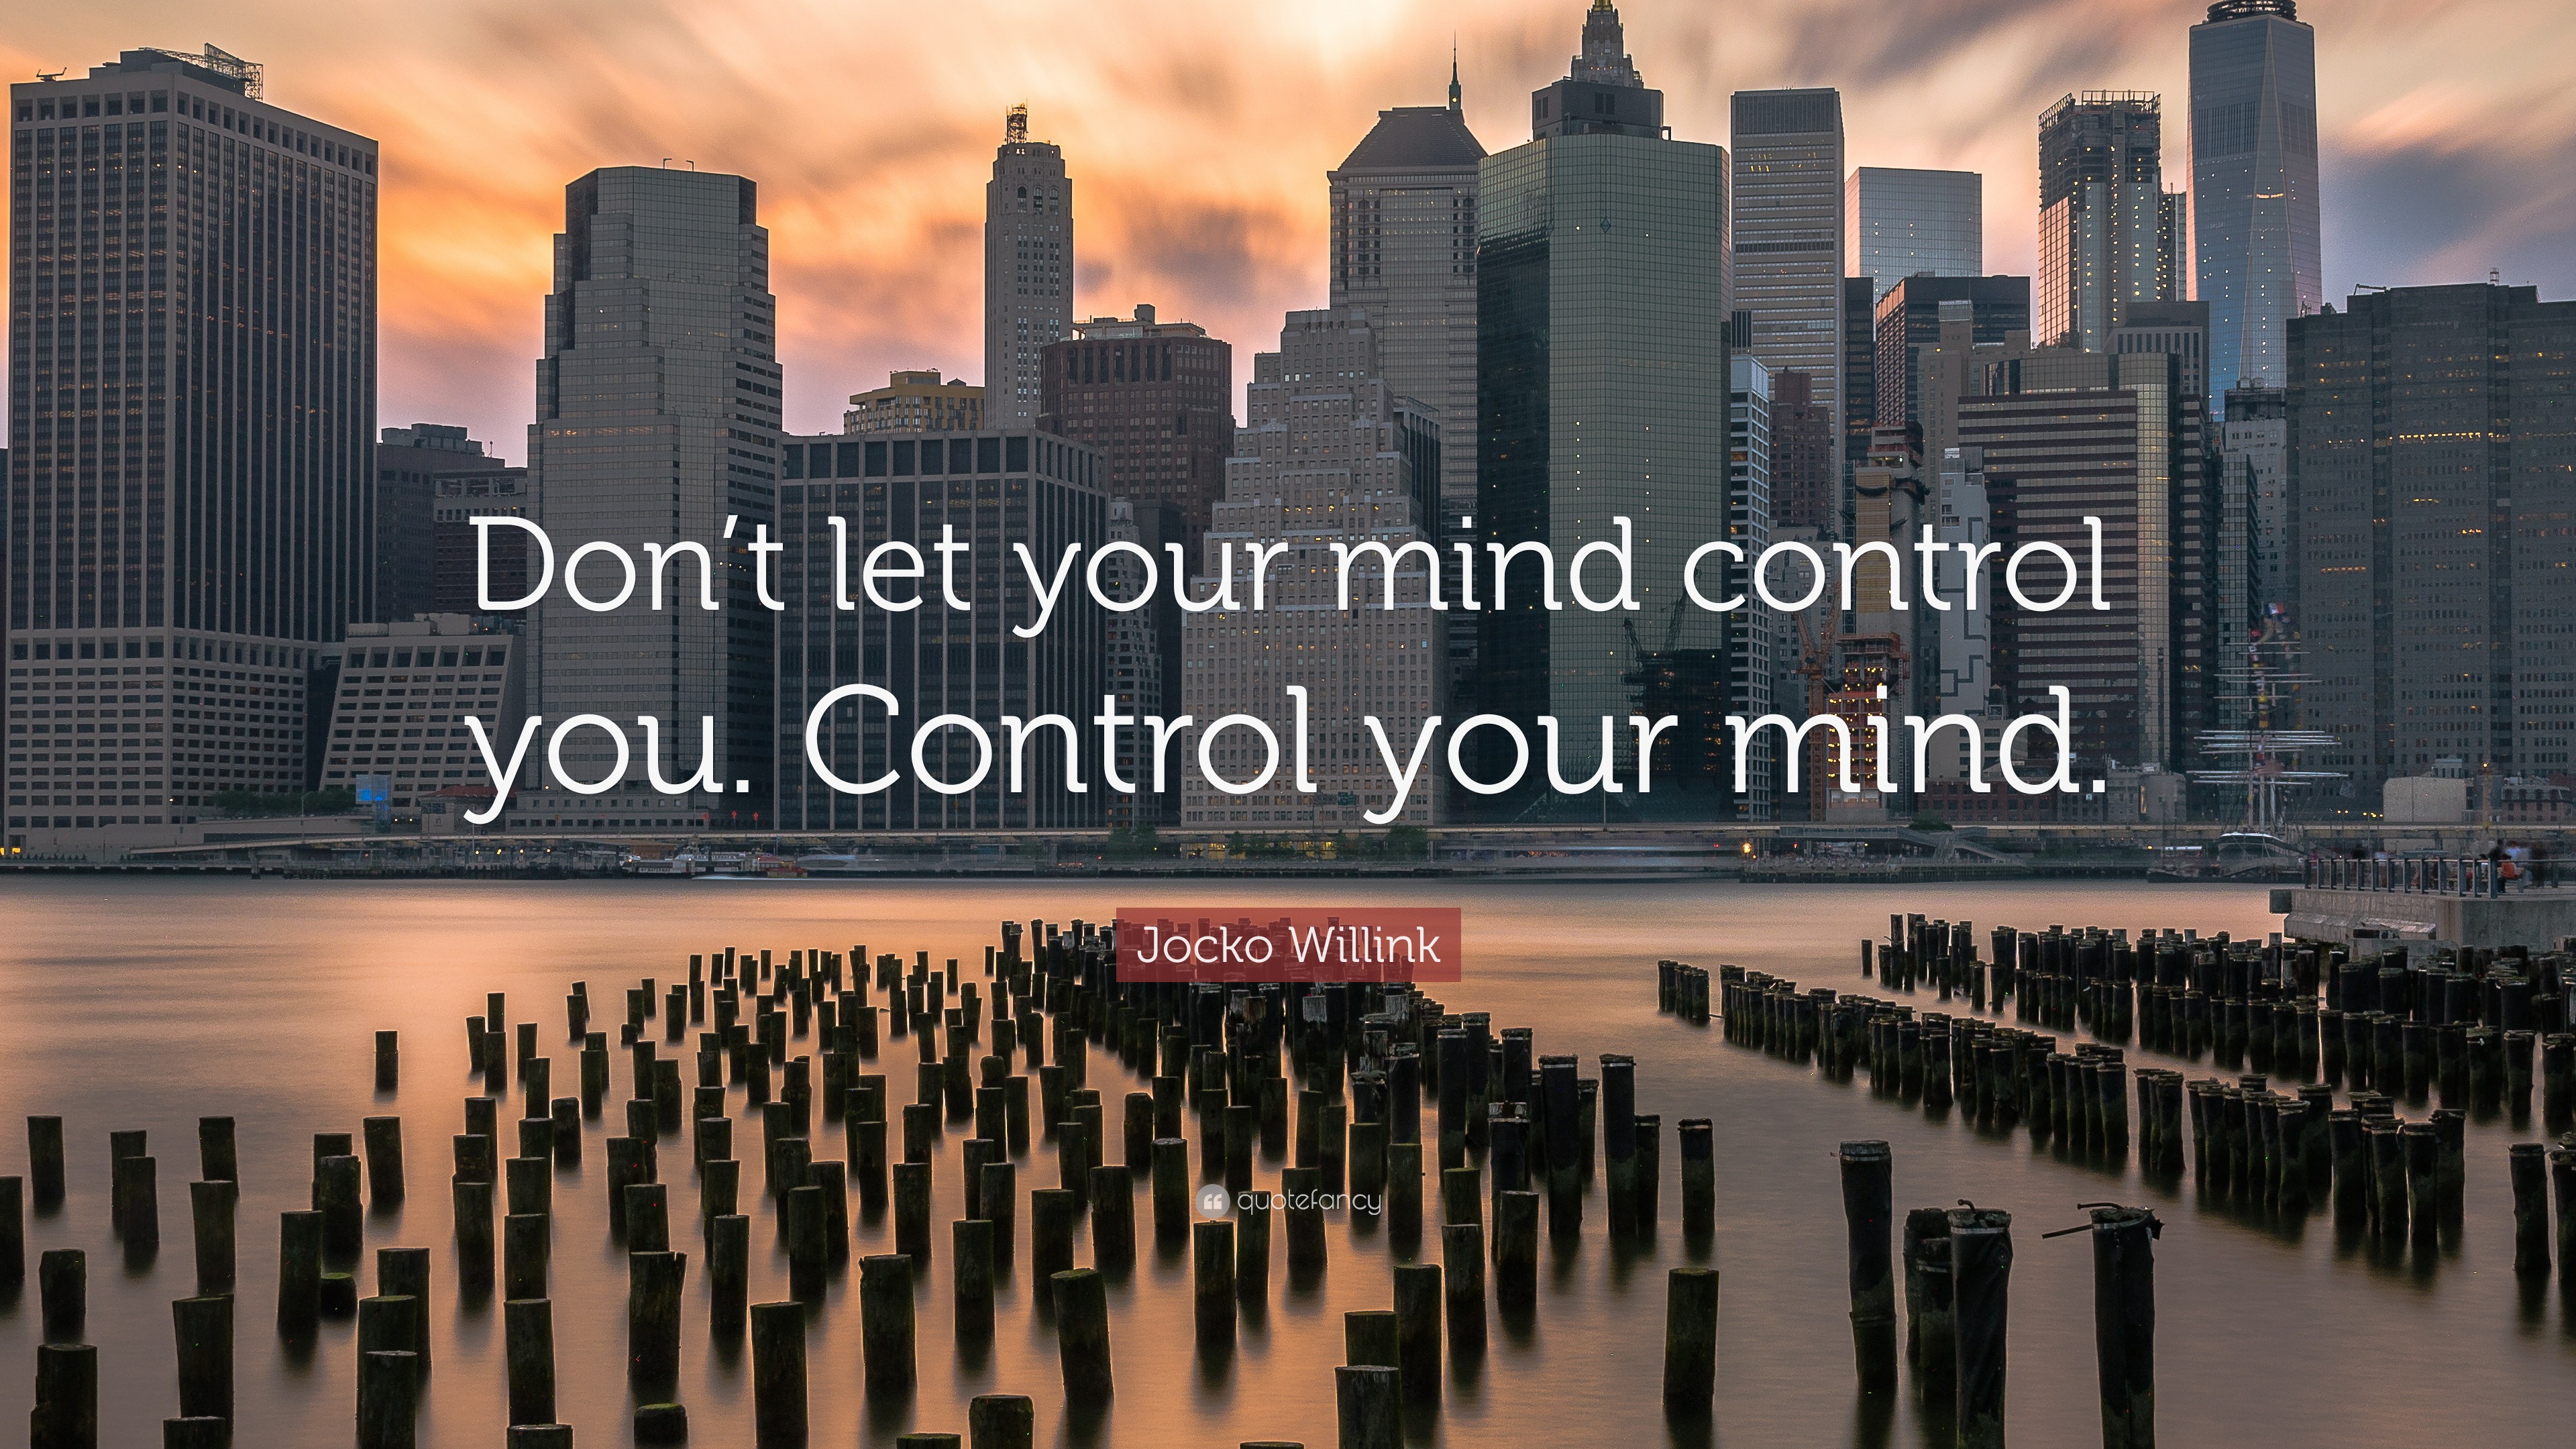 Jocko Willink Quote: “Don't let your mind control you. Control your mind.”